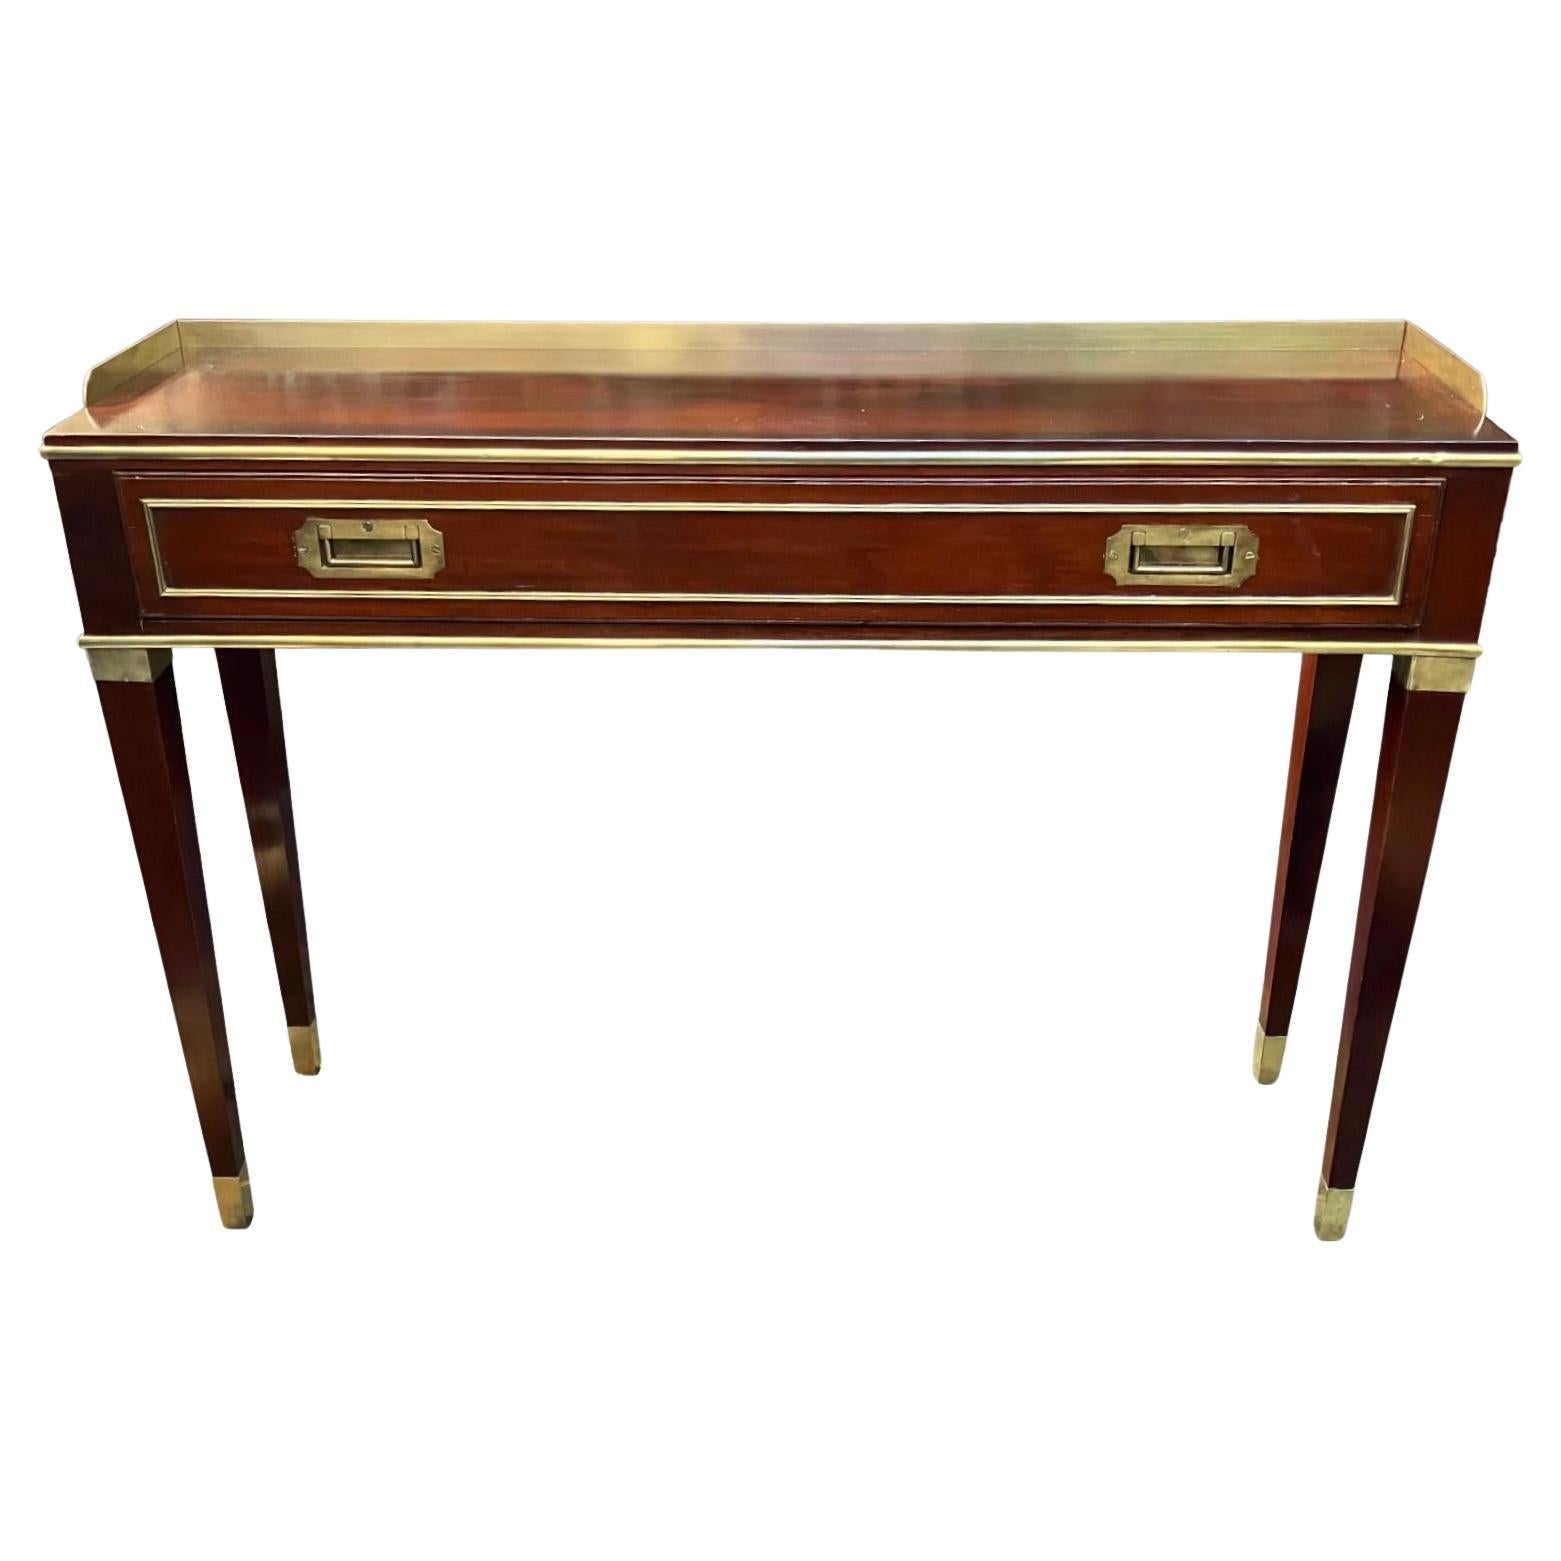 English Campaign Style Mahogany Console Table of Narrow Proportions, Circa 1930 For Sale